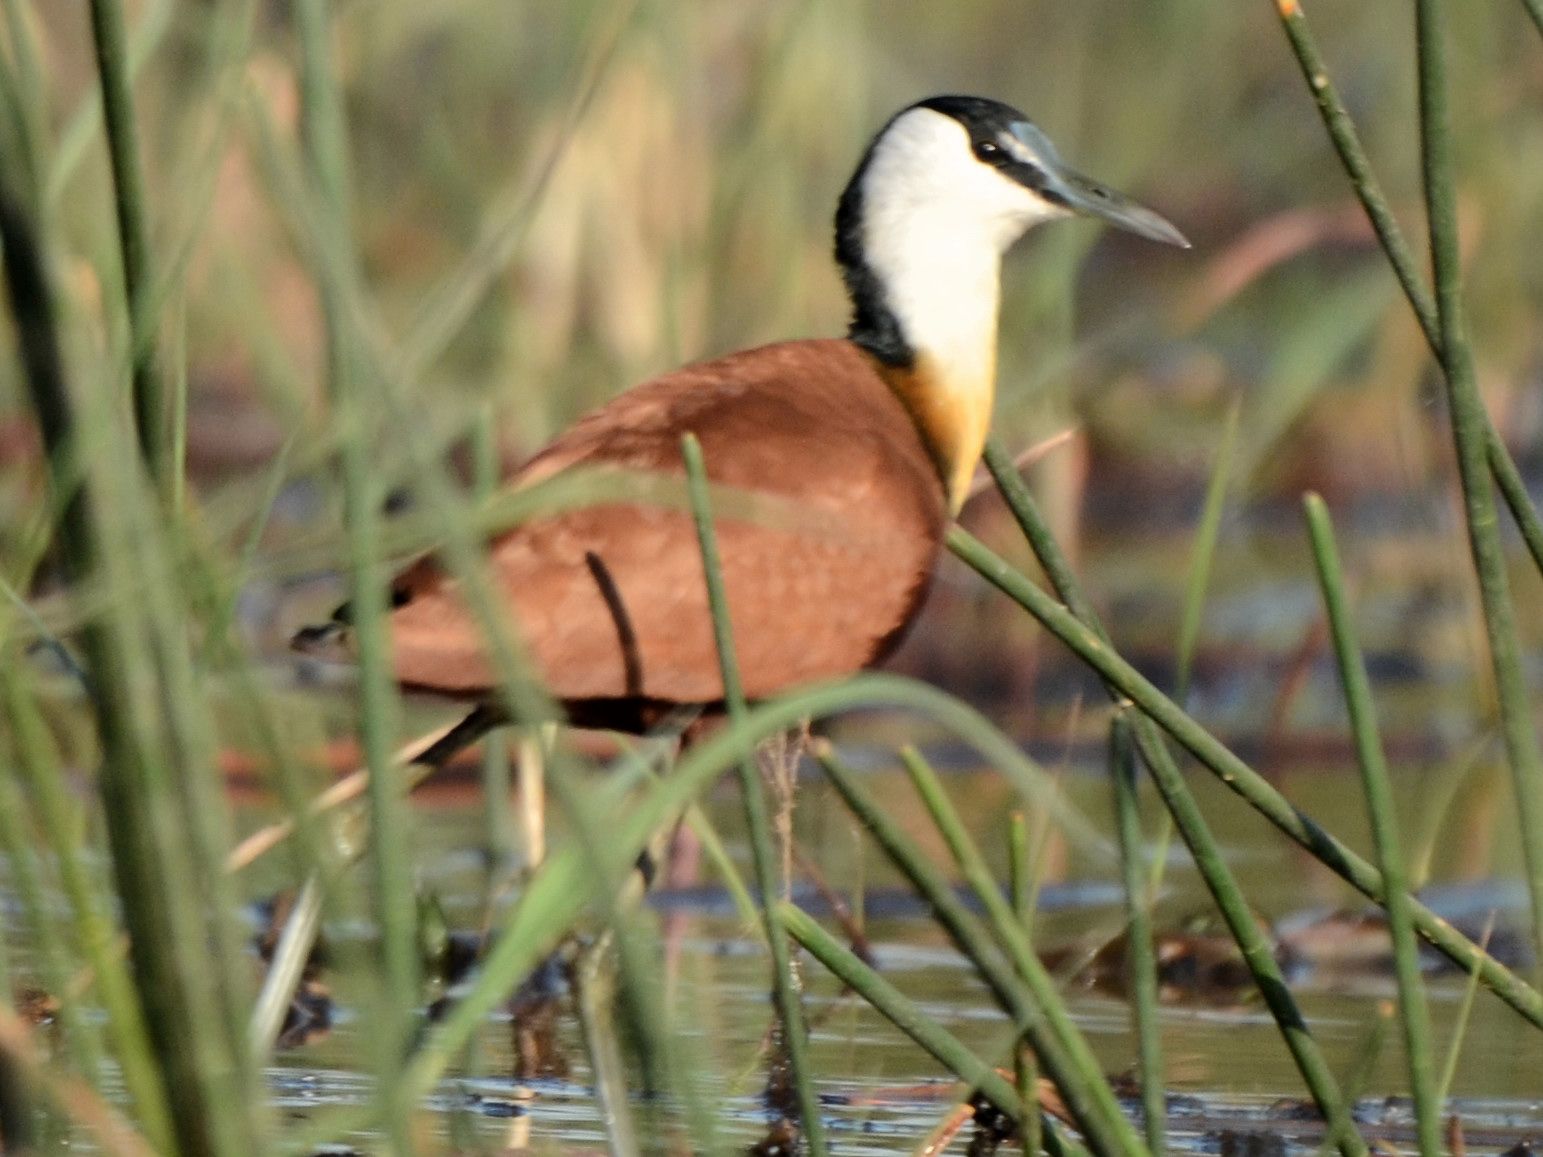 Click picture to see more African Jacanas.